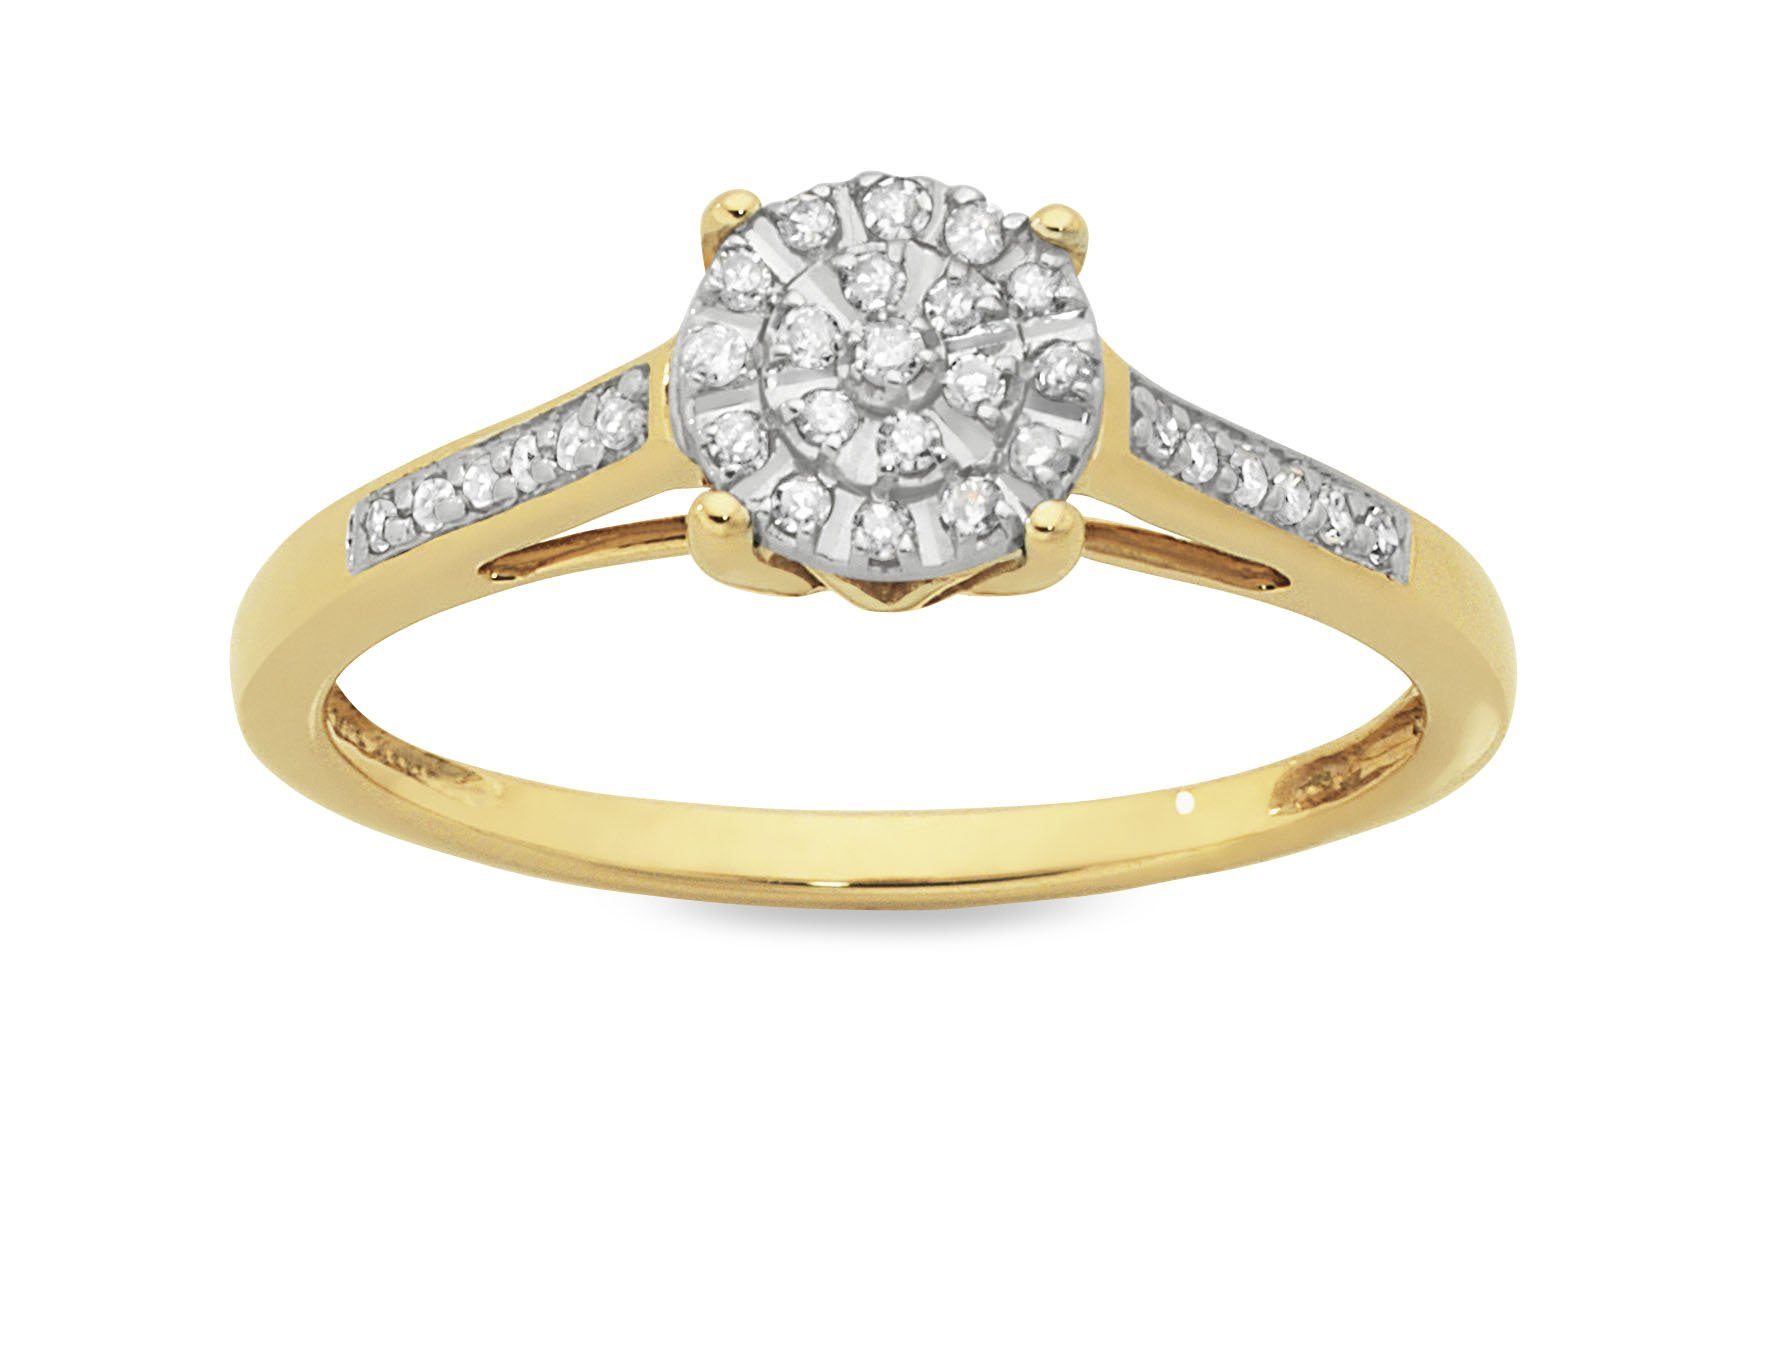 Martina Ring with 0.15ct of Diamonds in 9ct Yellow Gold | 9M00001 ...